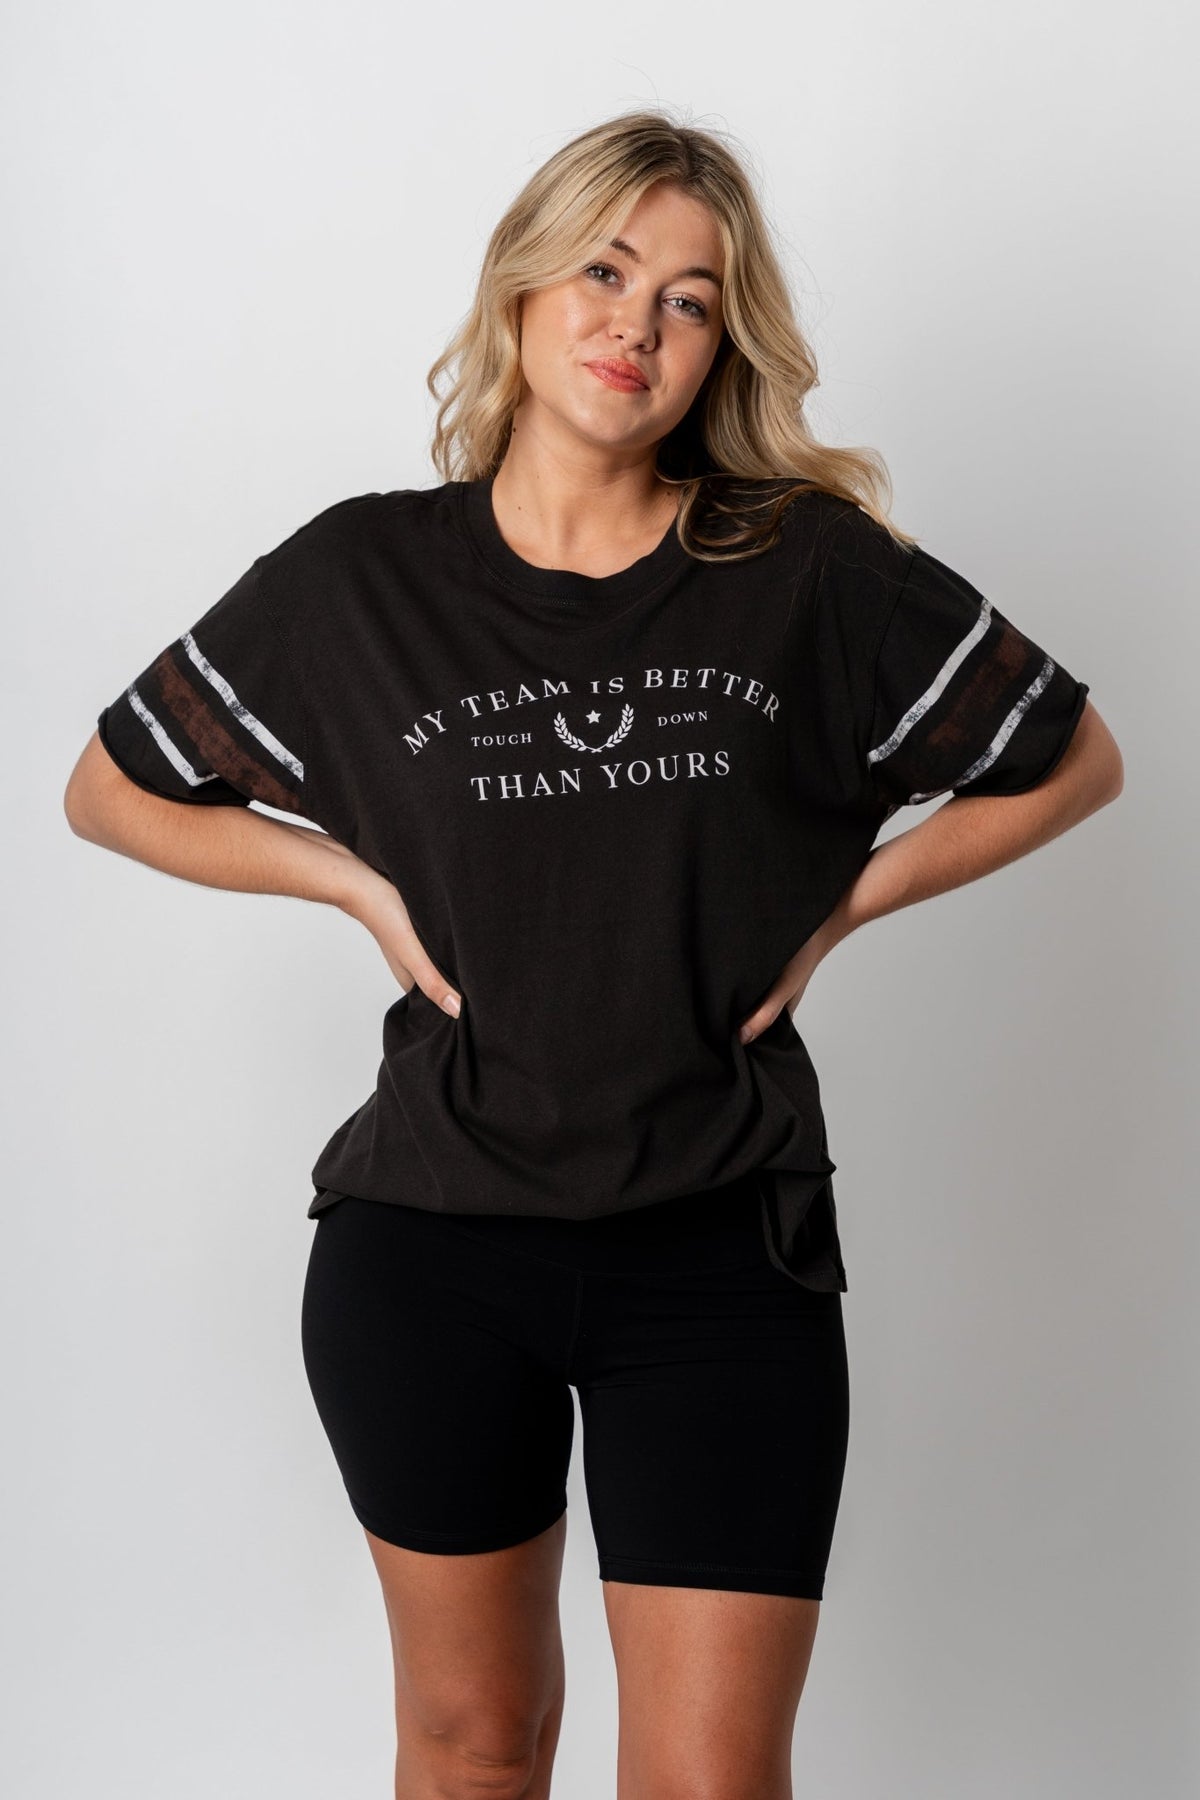 Z Supply My team is better boyfriend tee vintage black - Z Supply T-shirts - Z Supply Tops, Dresses, Tanks, Tees, Cardigans, Joggers and Loungewear at Lush Fashion Lounge